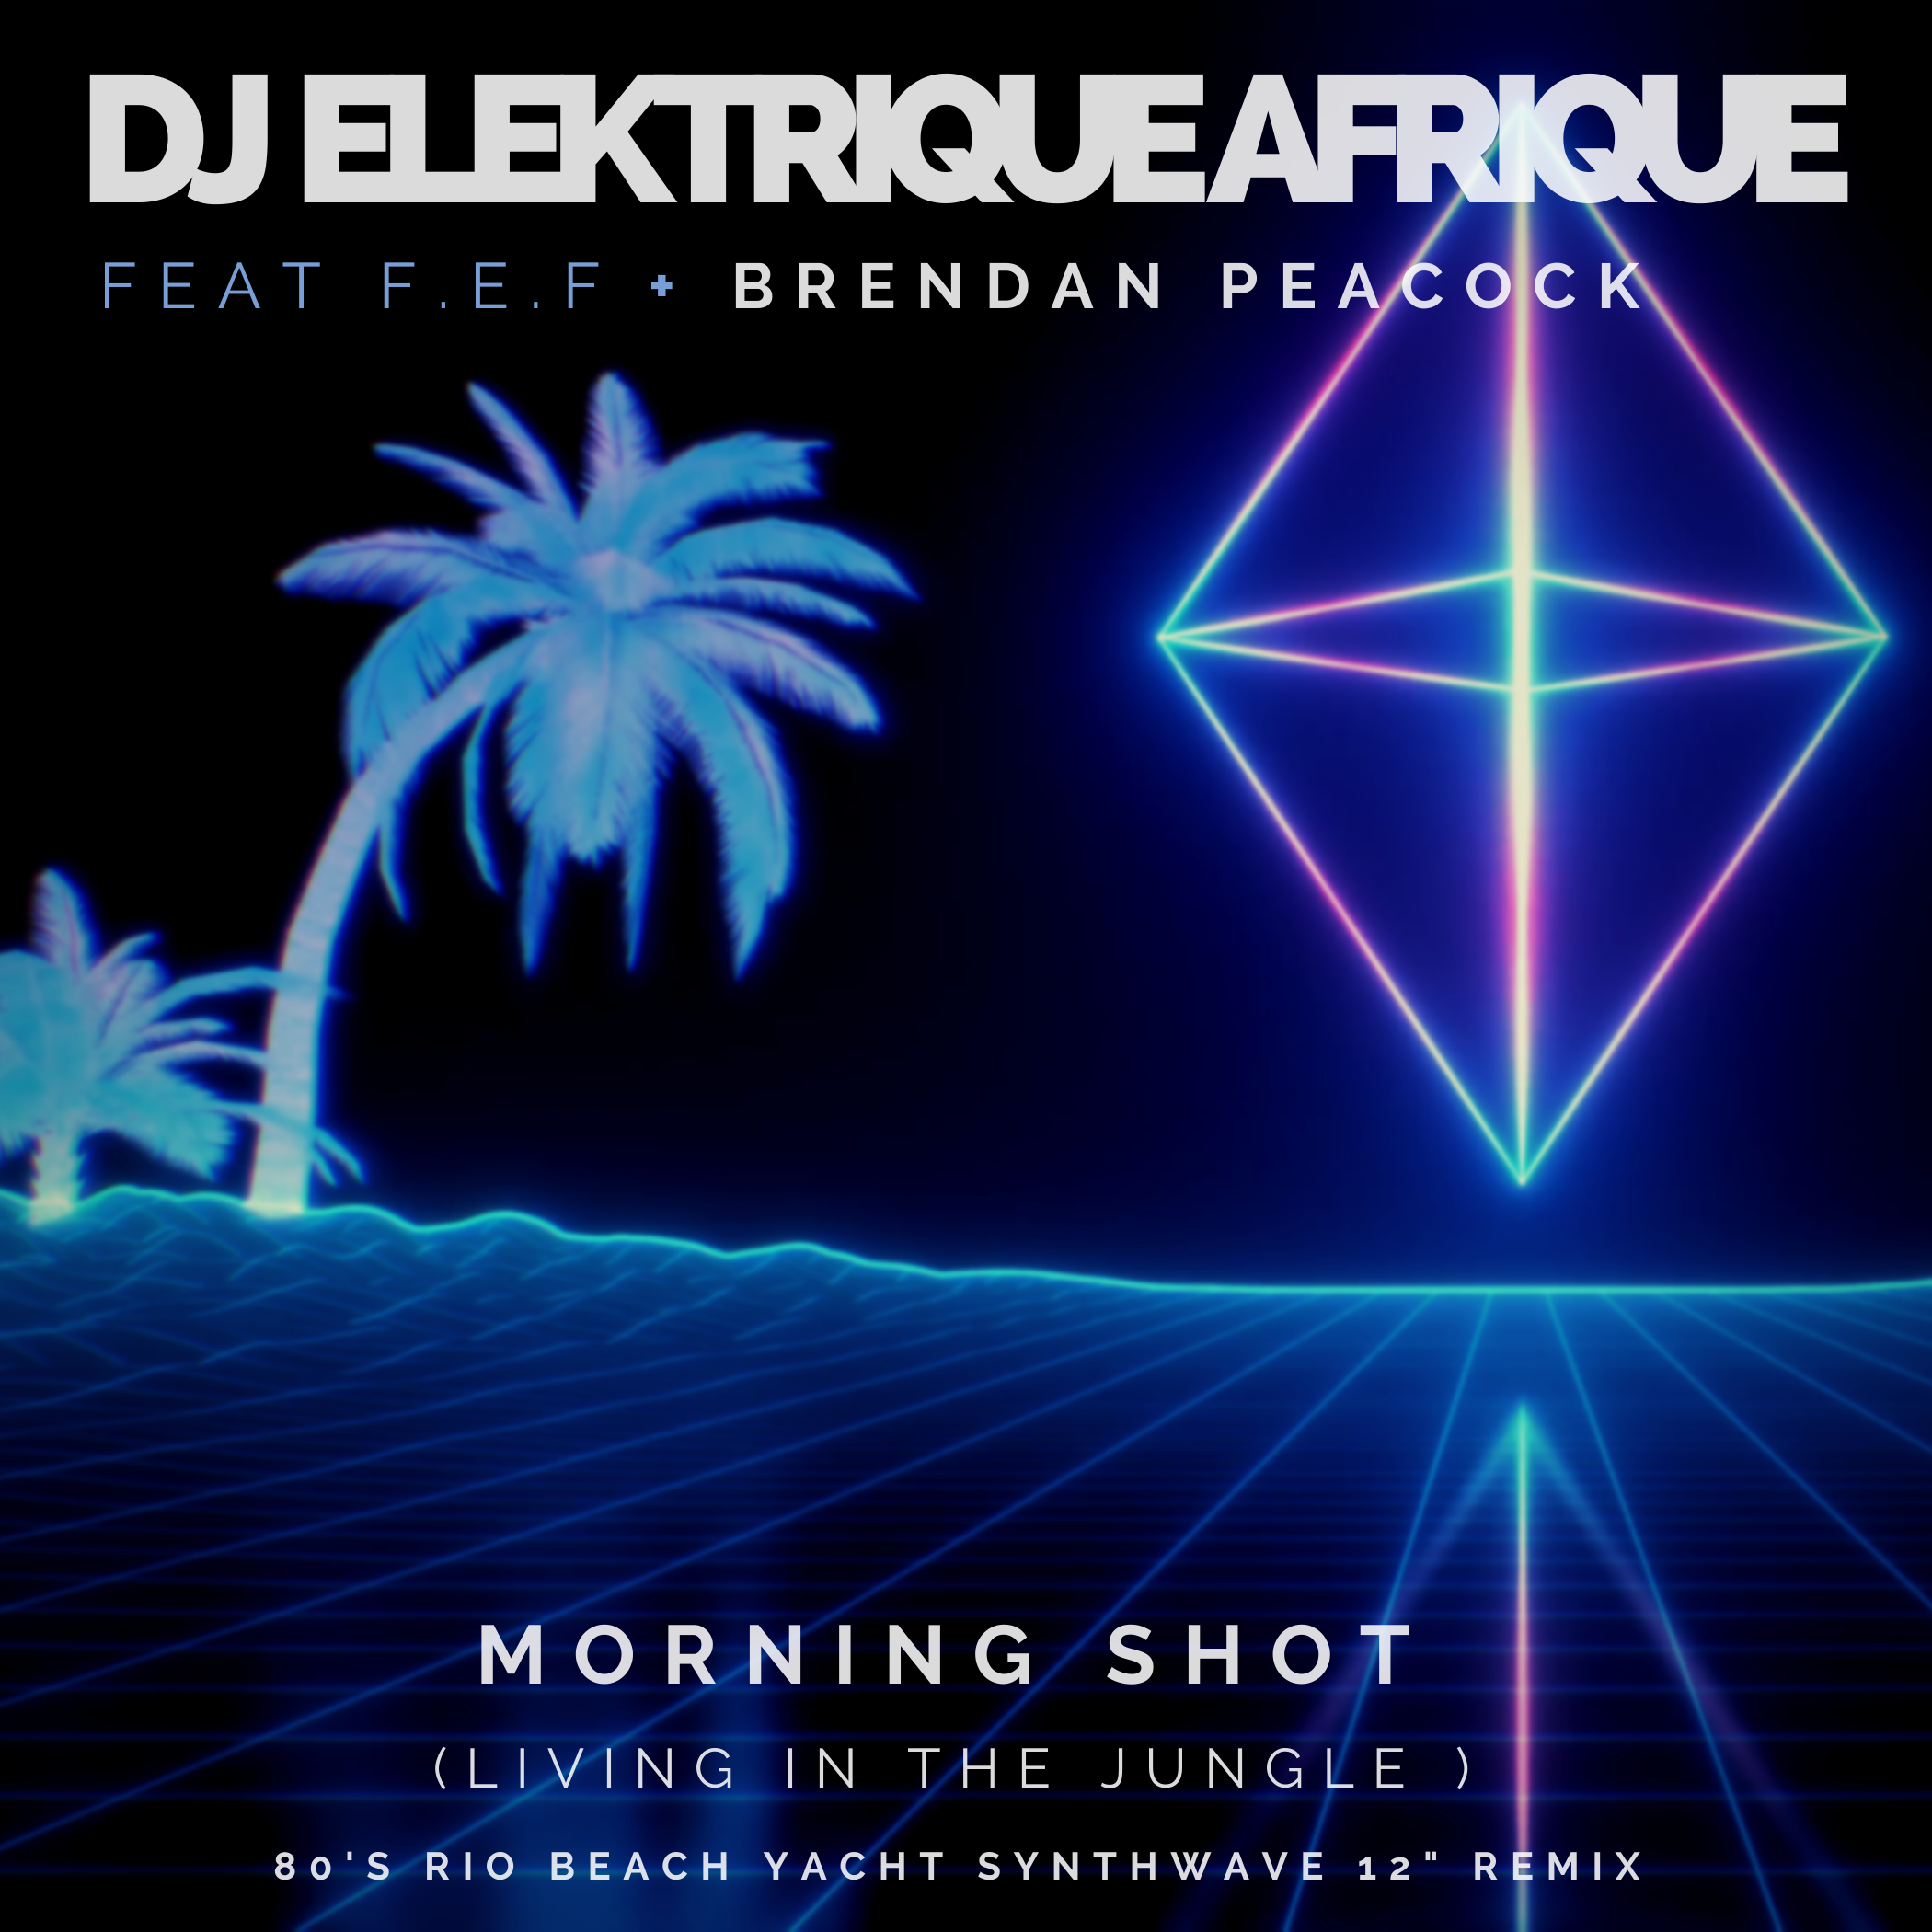 DJ Elektrique Afrique was inspired by a trip to the South African Wild Coast and the news analysis show and You Tube channel ‘Morning Shot’ with Roman Cabanac for his new single Morning Shot: Living in the Jungle